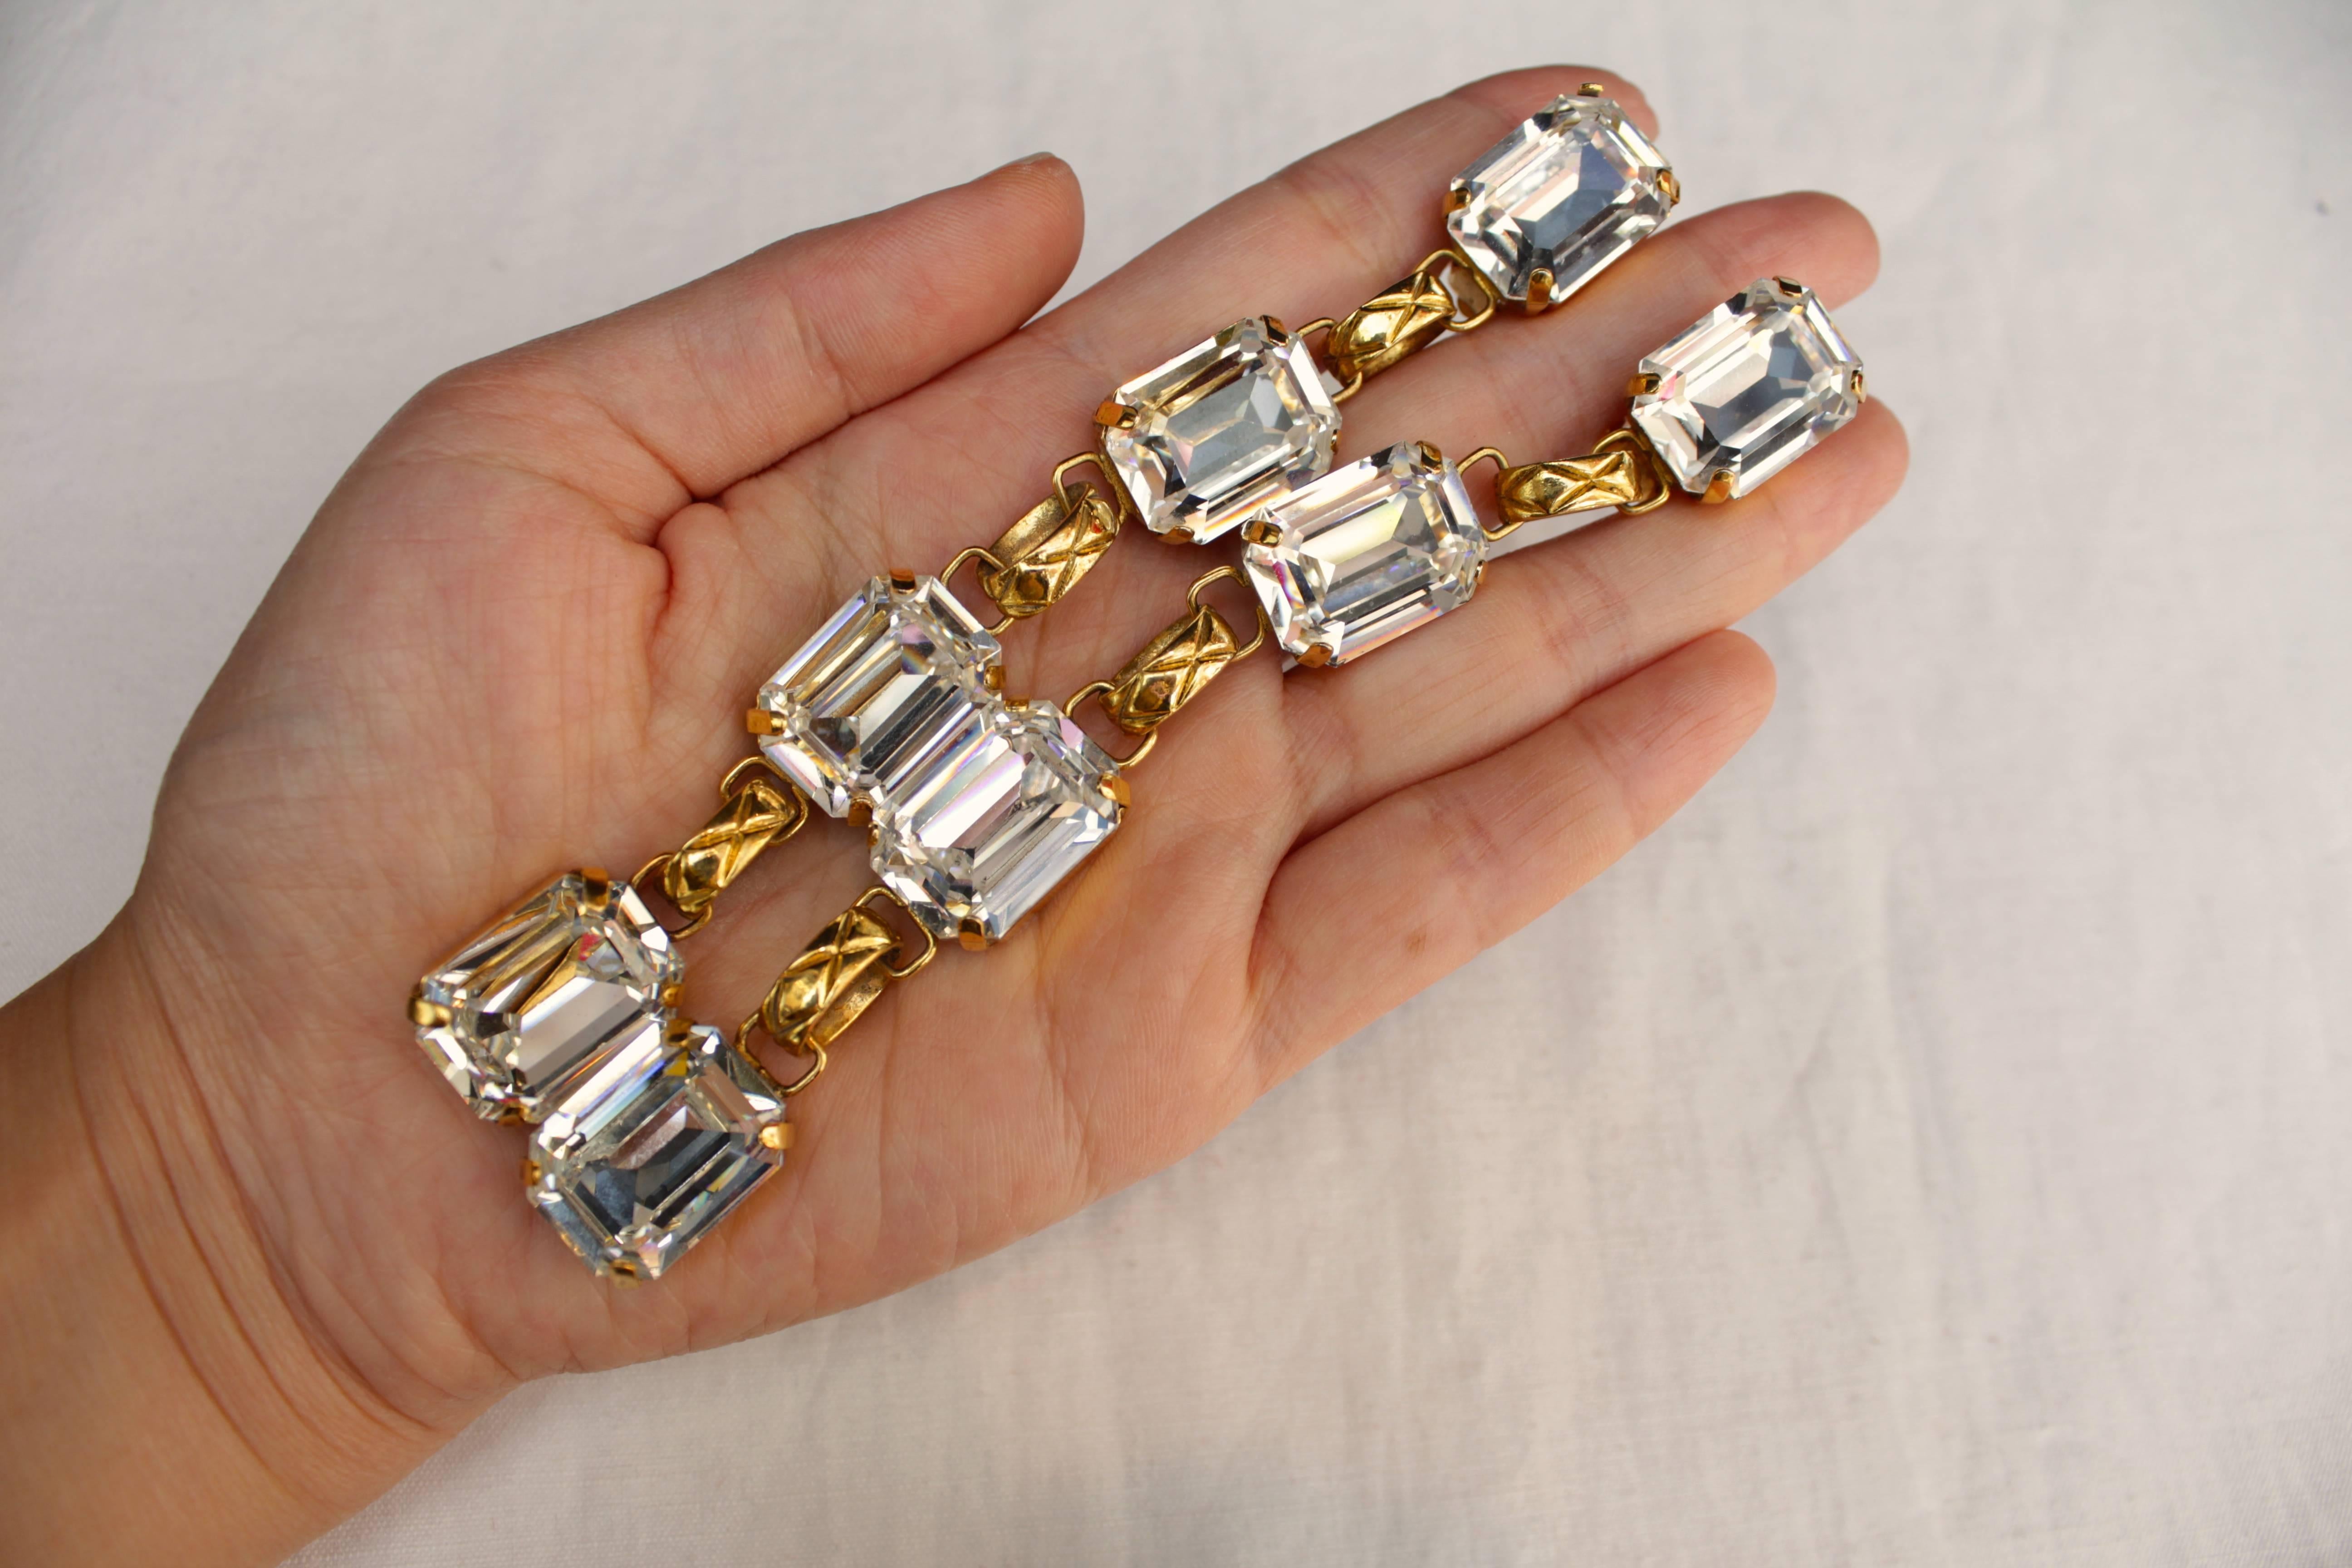 Women's Early 1990s Chanel Pendant Clip on Earrings in Gilt and Crystals